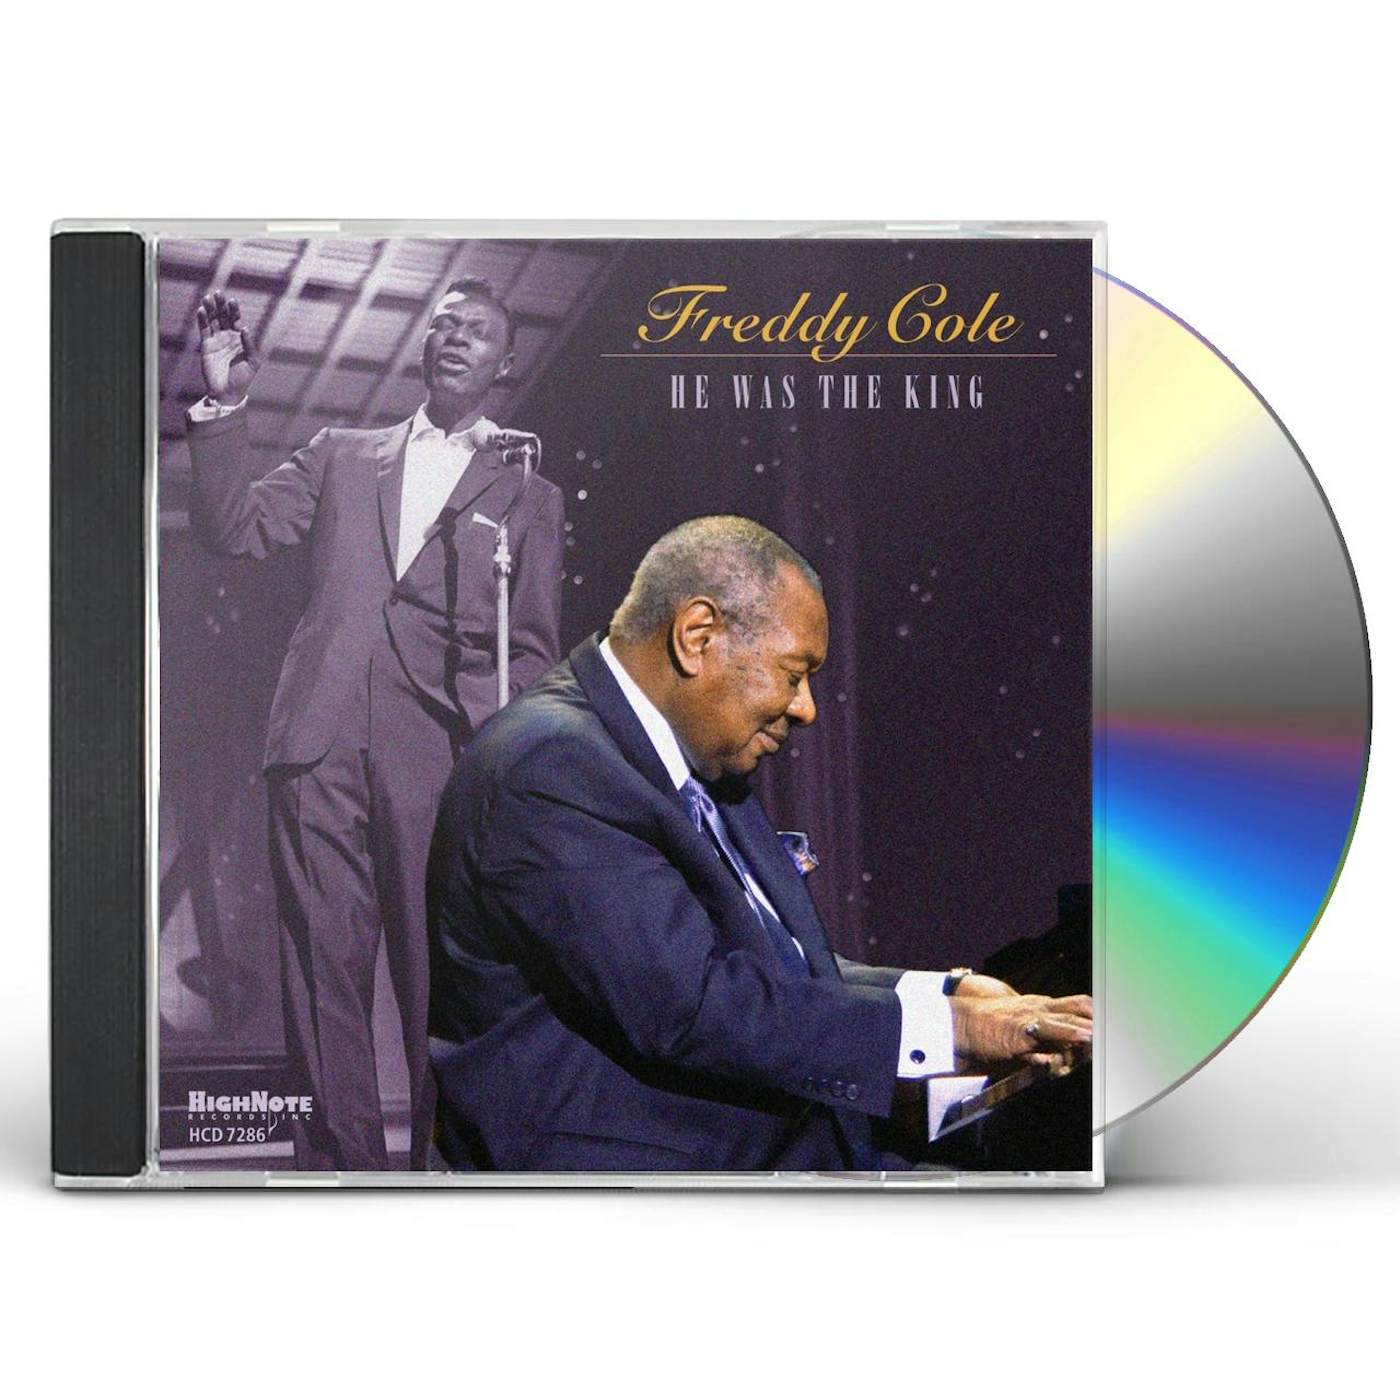 Freddy Cole HE WAS THE KING CD